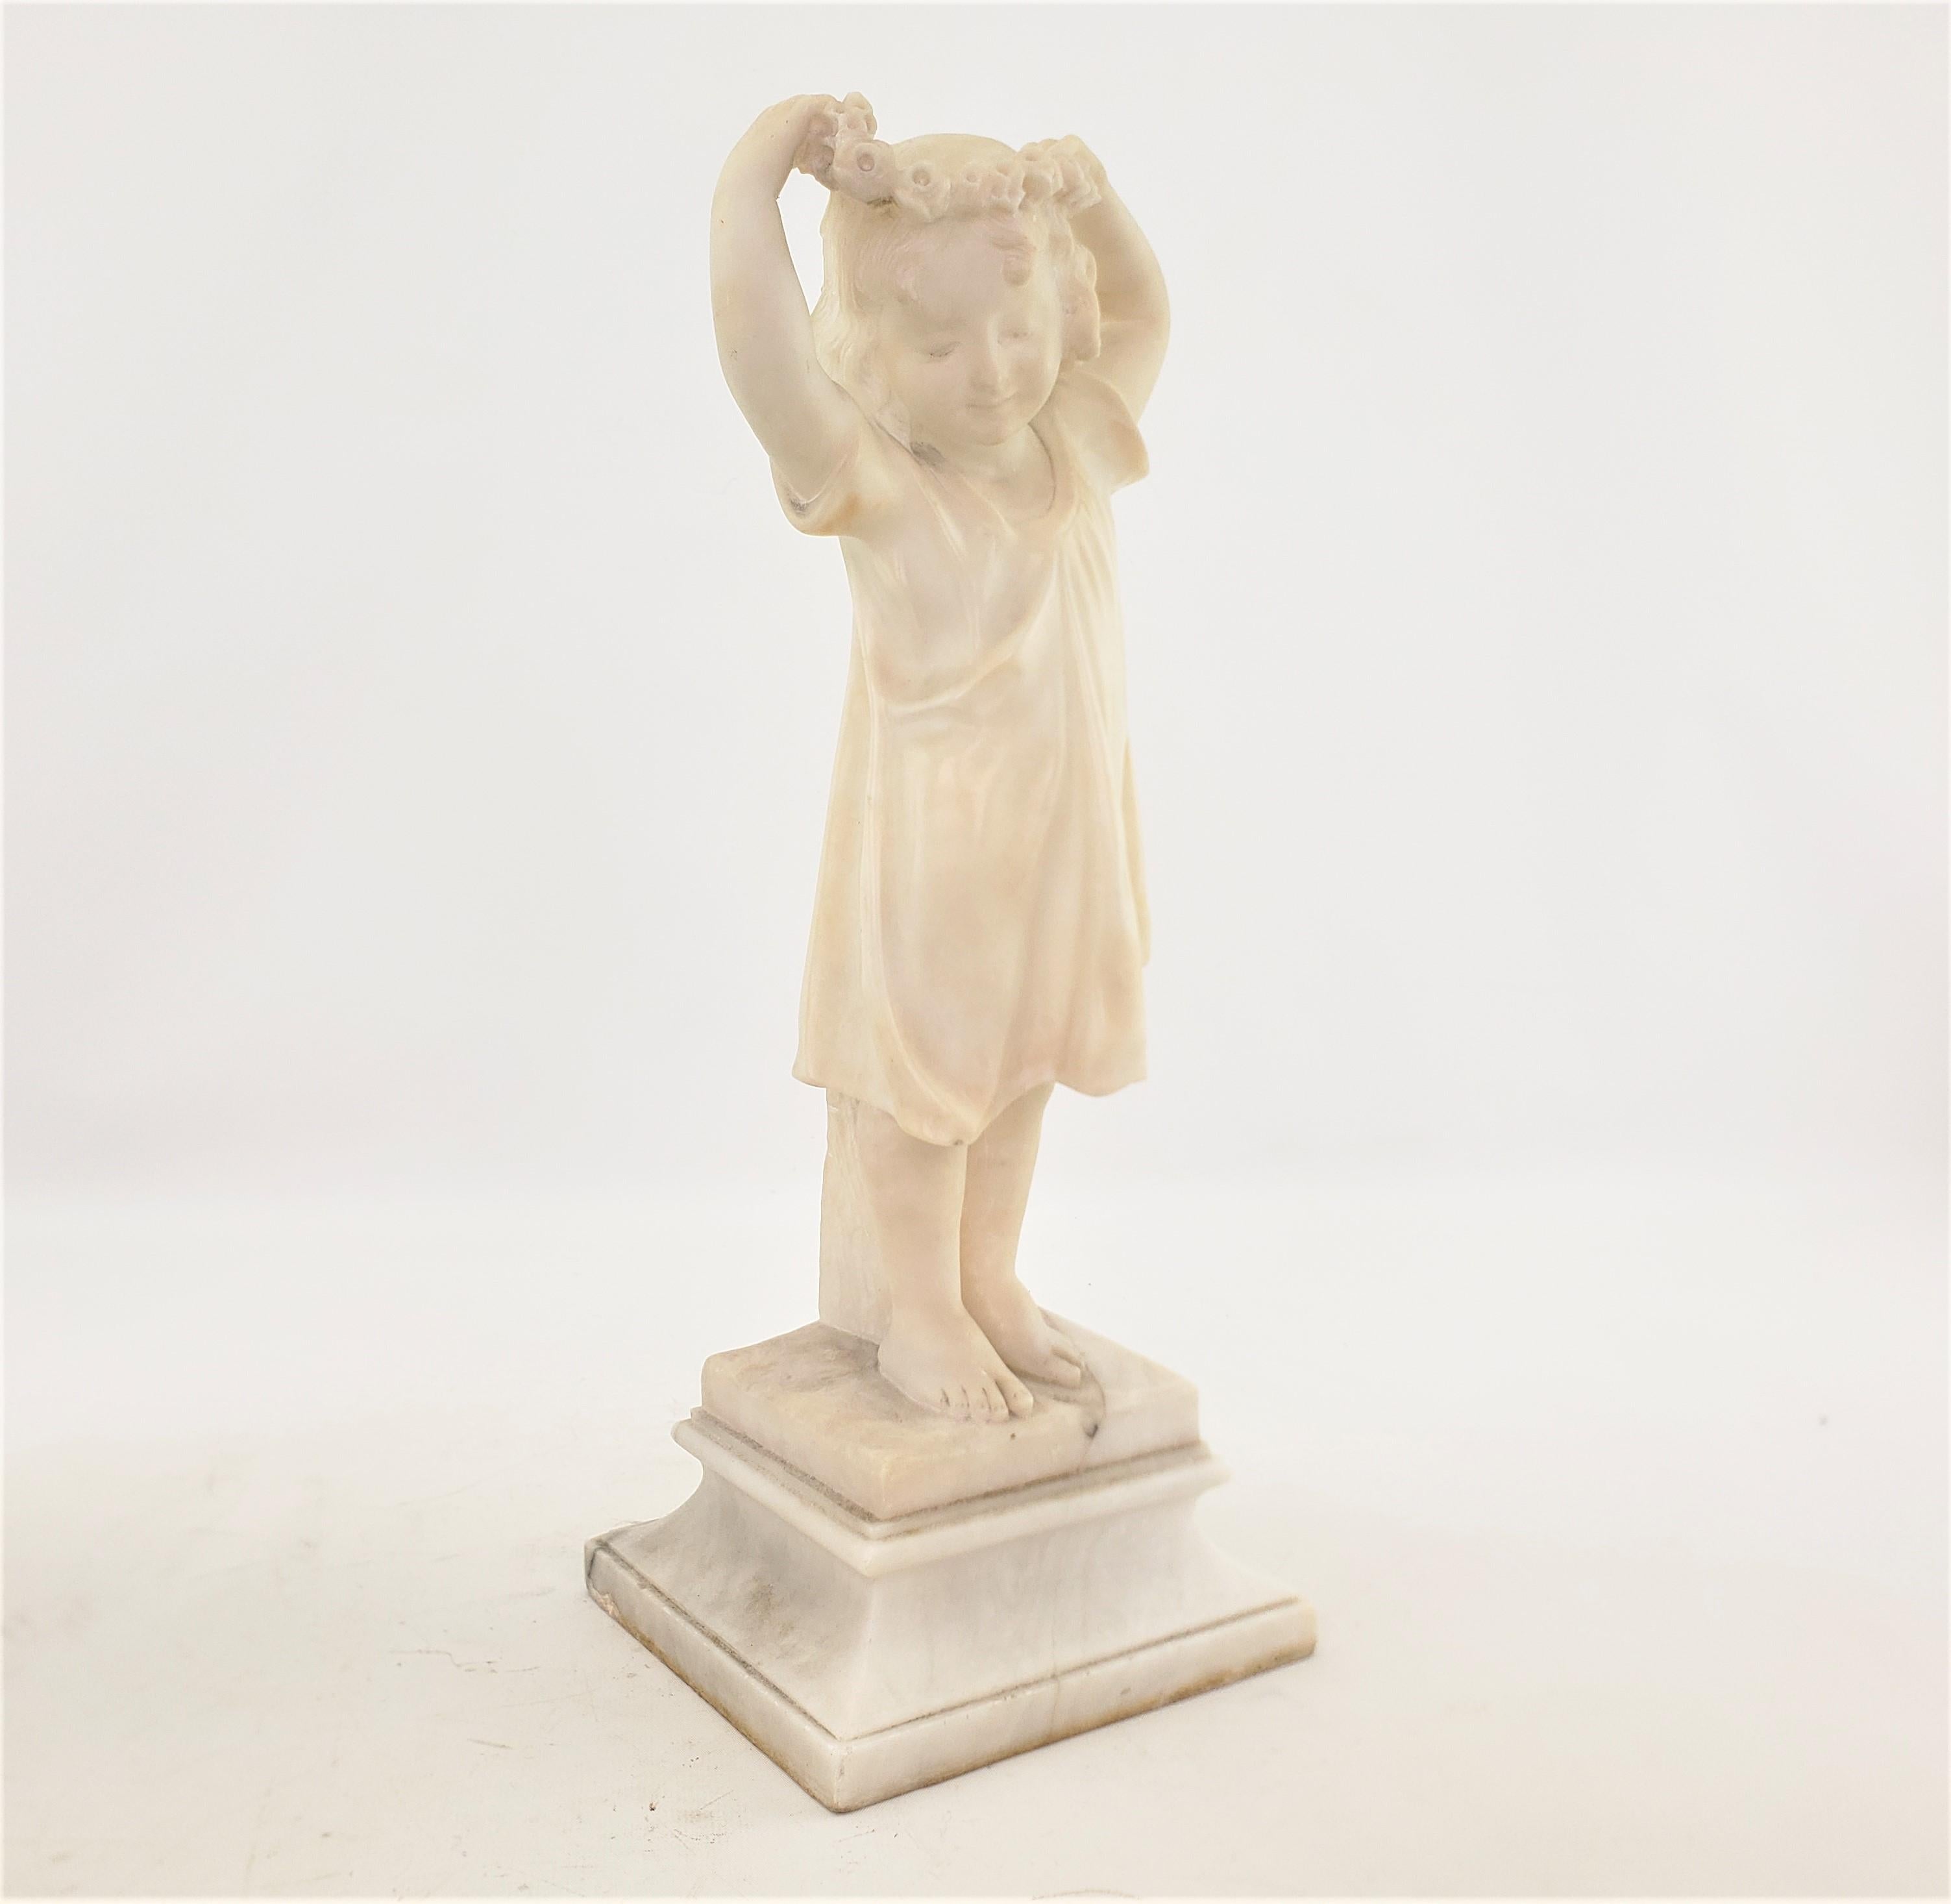 This well executed antique sculpture is unsigned, but presumed to have originated from Italy and date to approximately 1880 and done in the period late Victorian style. The sculpture is composed of alabaster and depicts a young girl straightening